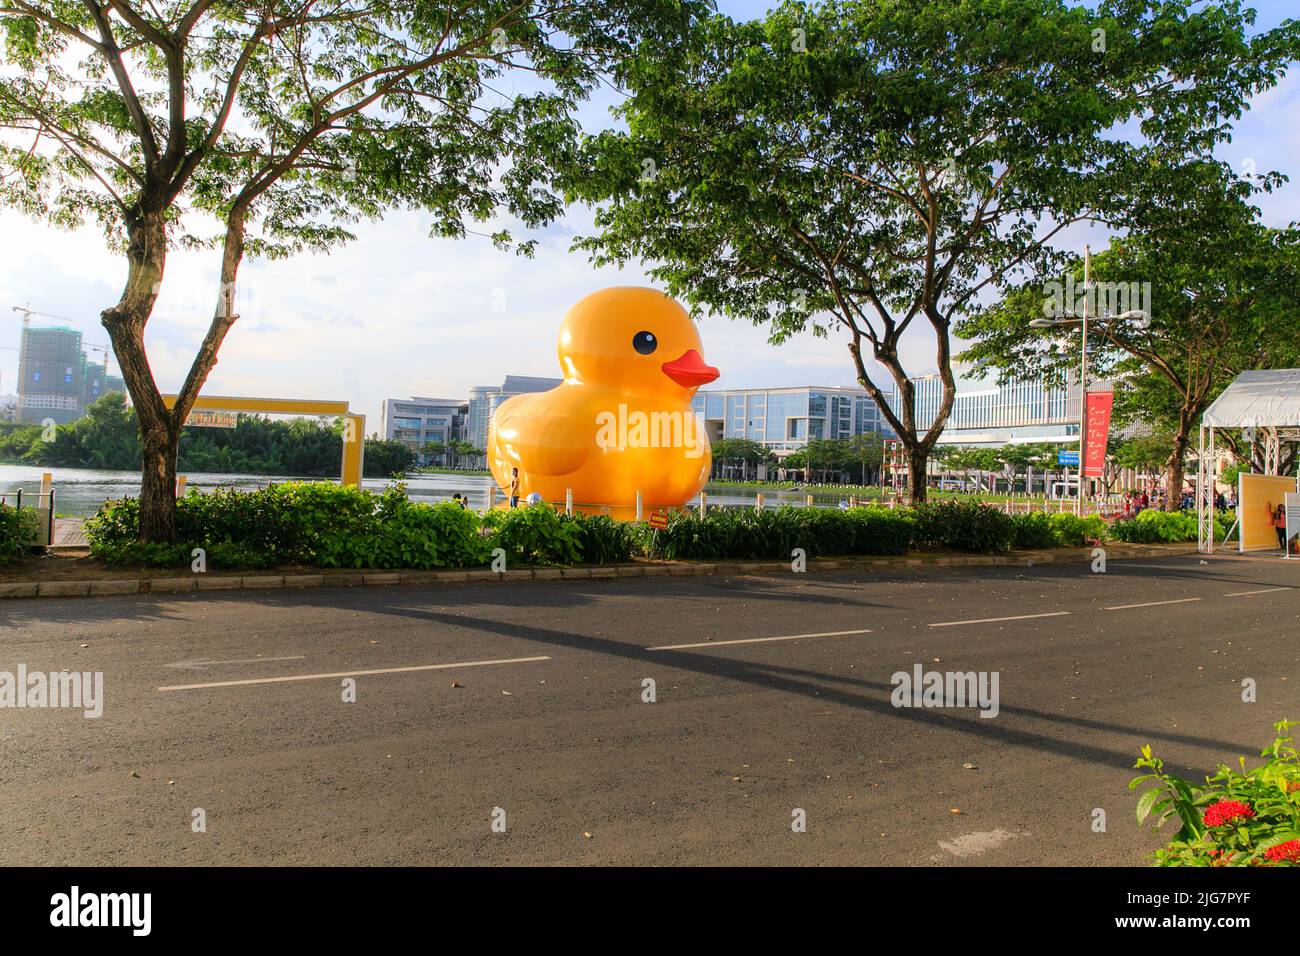 Giant 'Rubber Duck' sculpture by artist Florentijn Hofman swims in Phu My Hung, Vietnam. Local residents and tourists are drawn to the attraction. Stock Photo